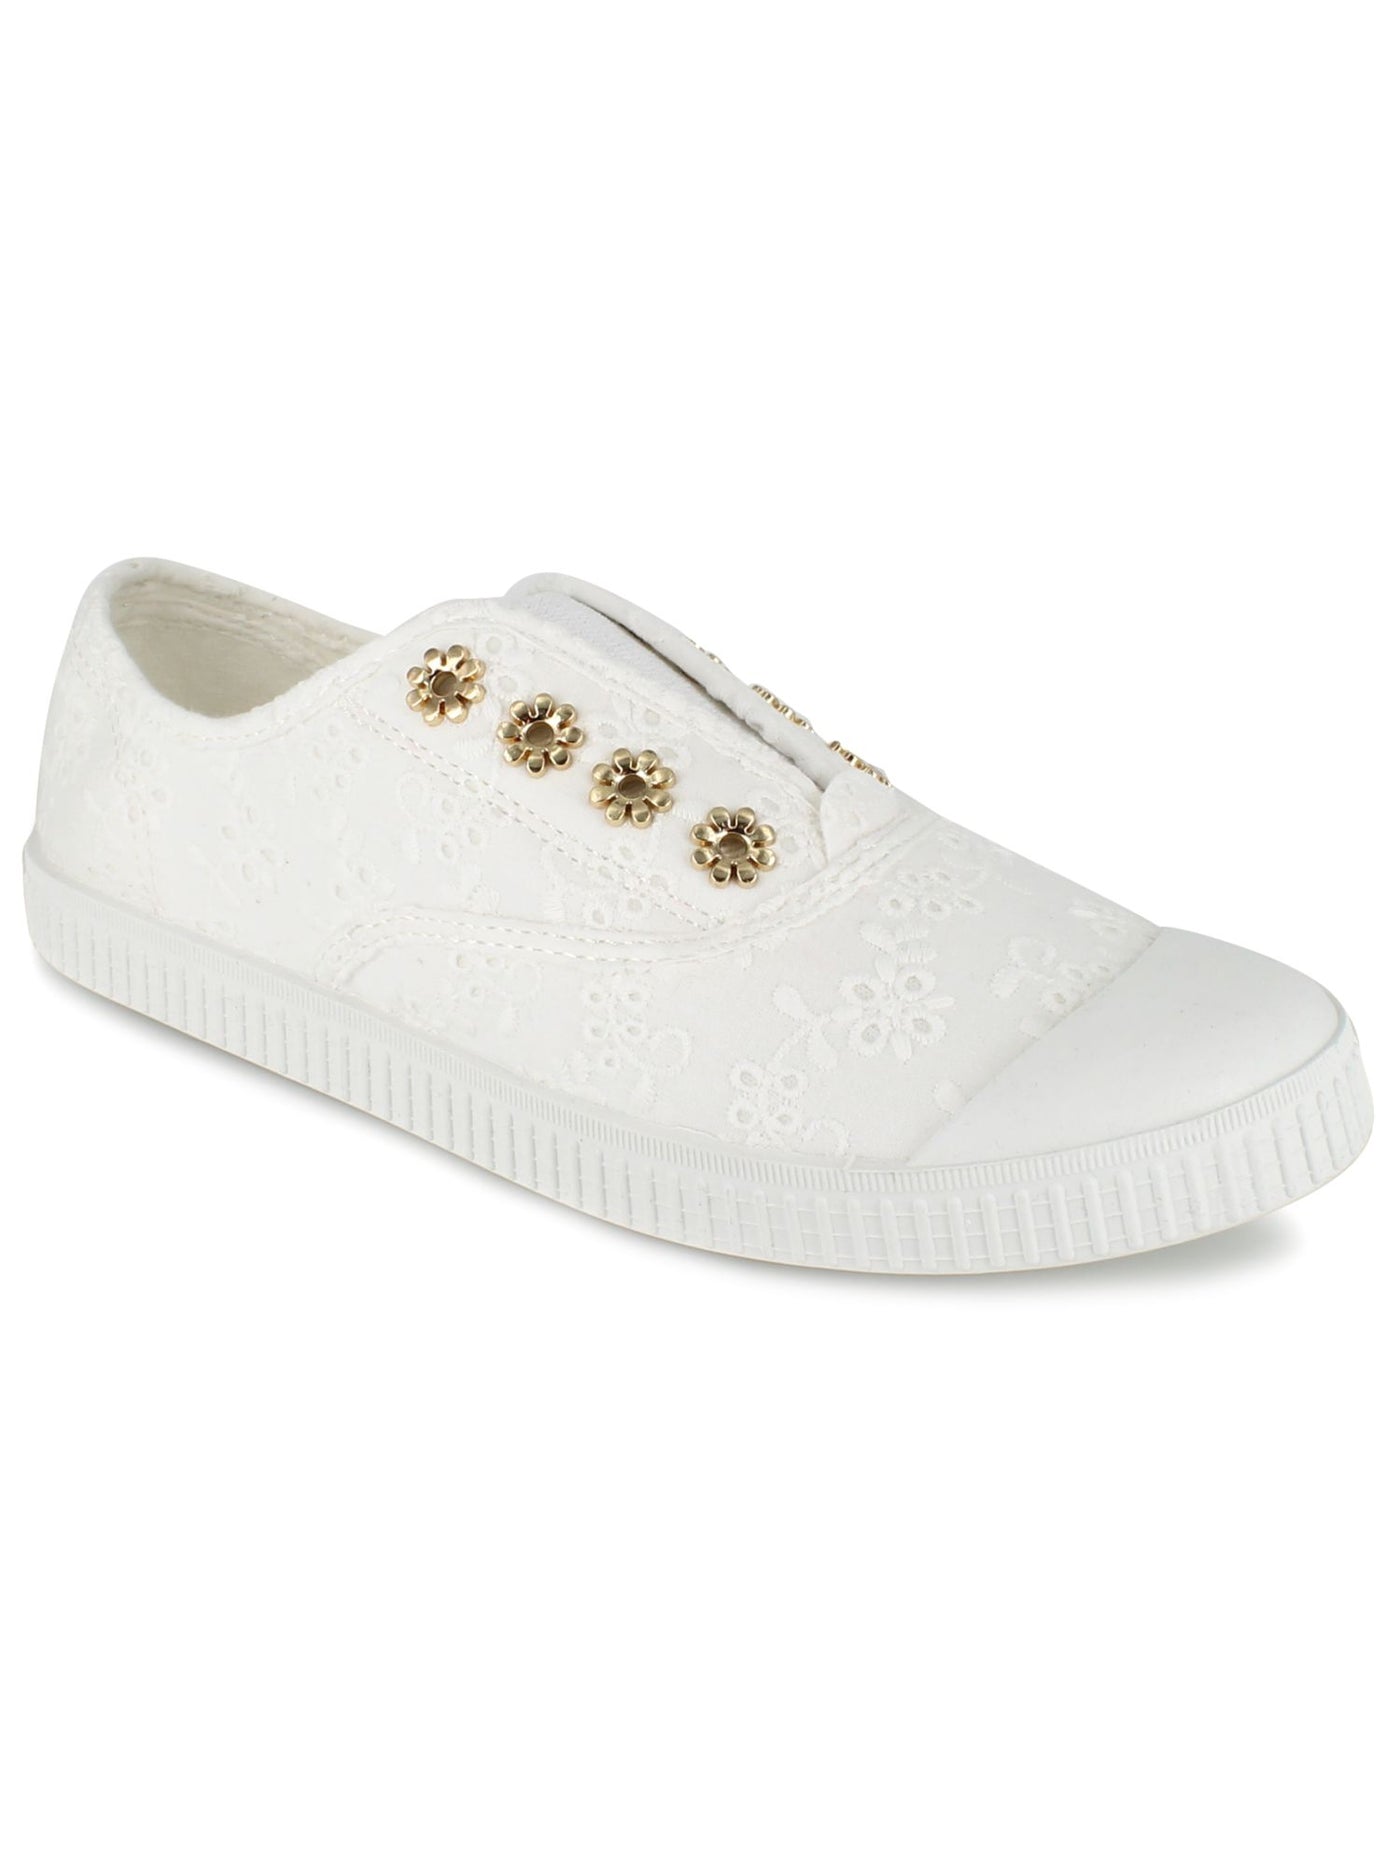 XOXO Womens White Goring Eyelet Cushioned Azie Cap Toe Slip On Sneakers Shoes 11 M